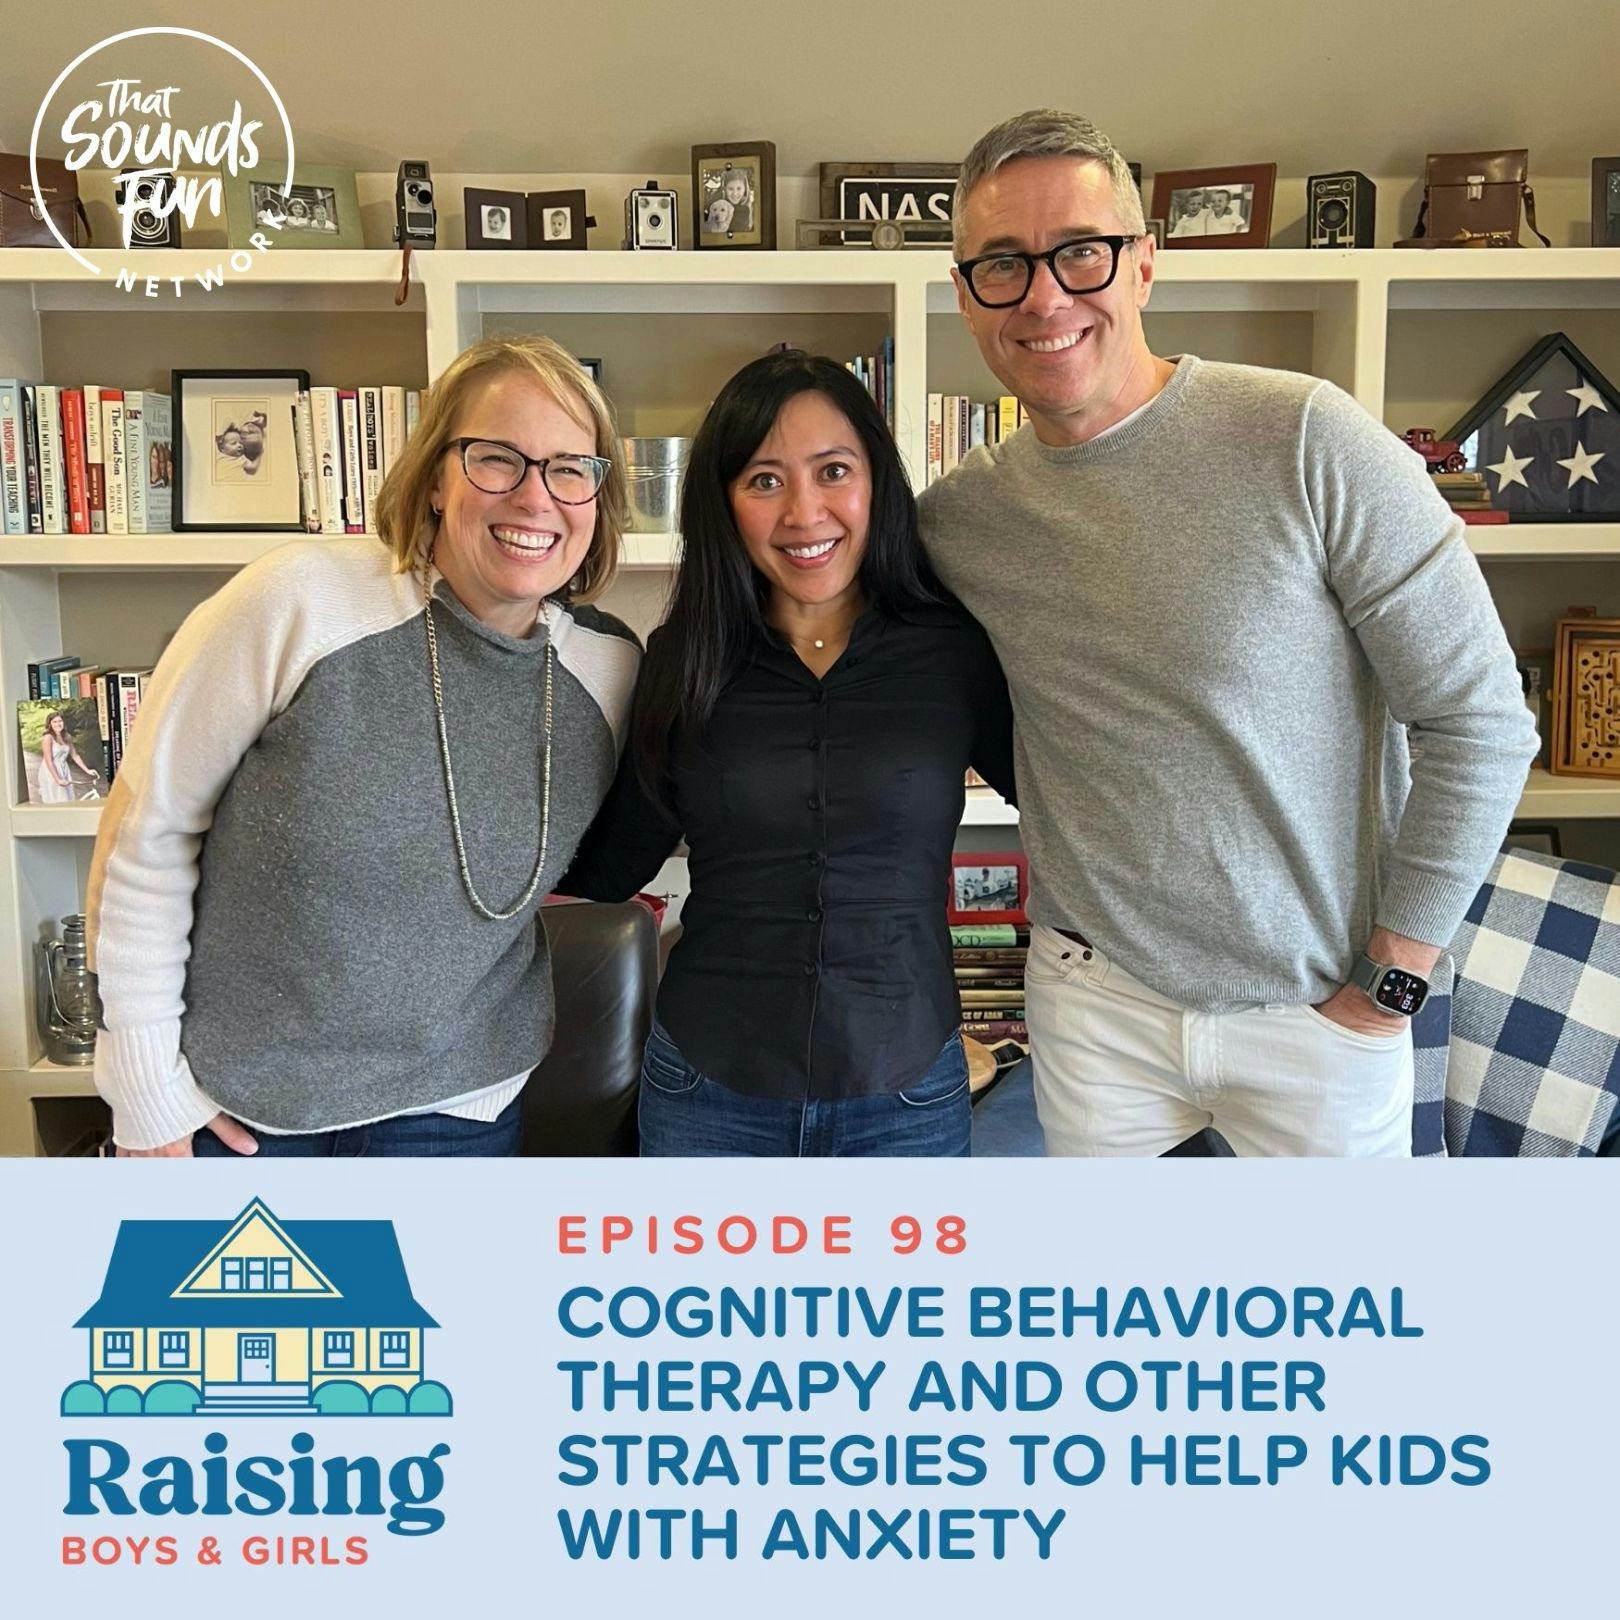 Episode 98: Cognitive Behavioral Therapy and Other Strategies to Help Kids with Anxiety